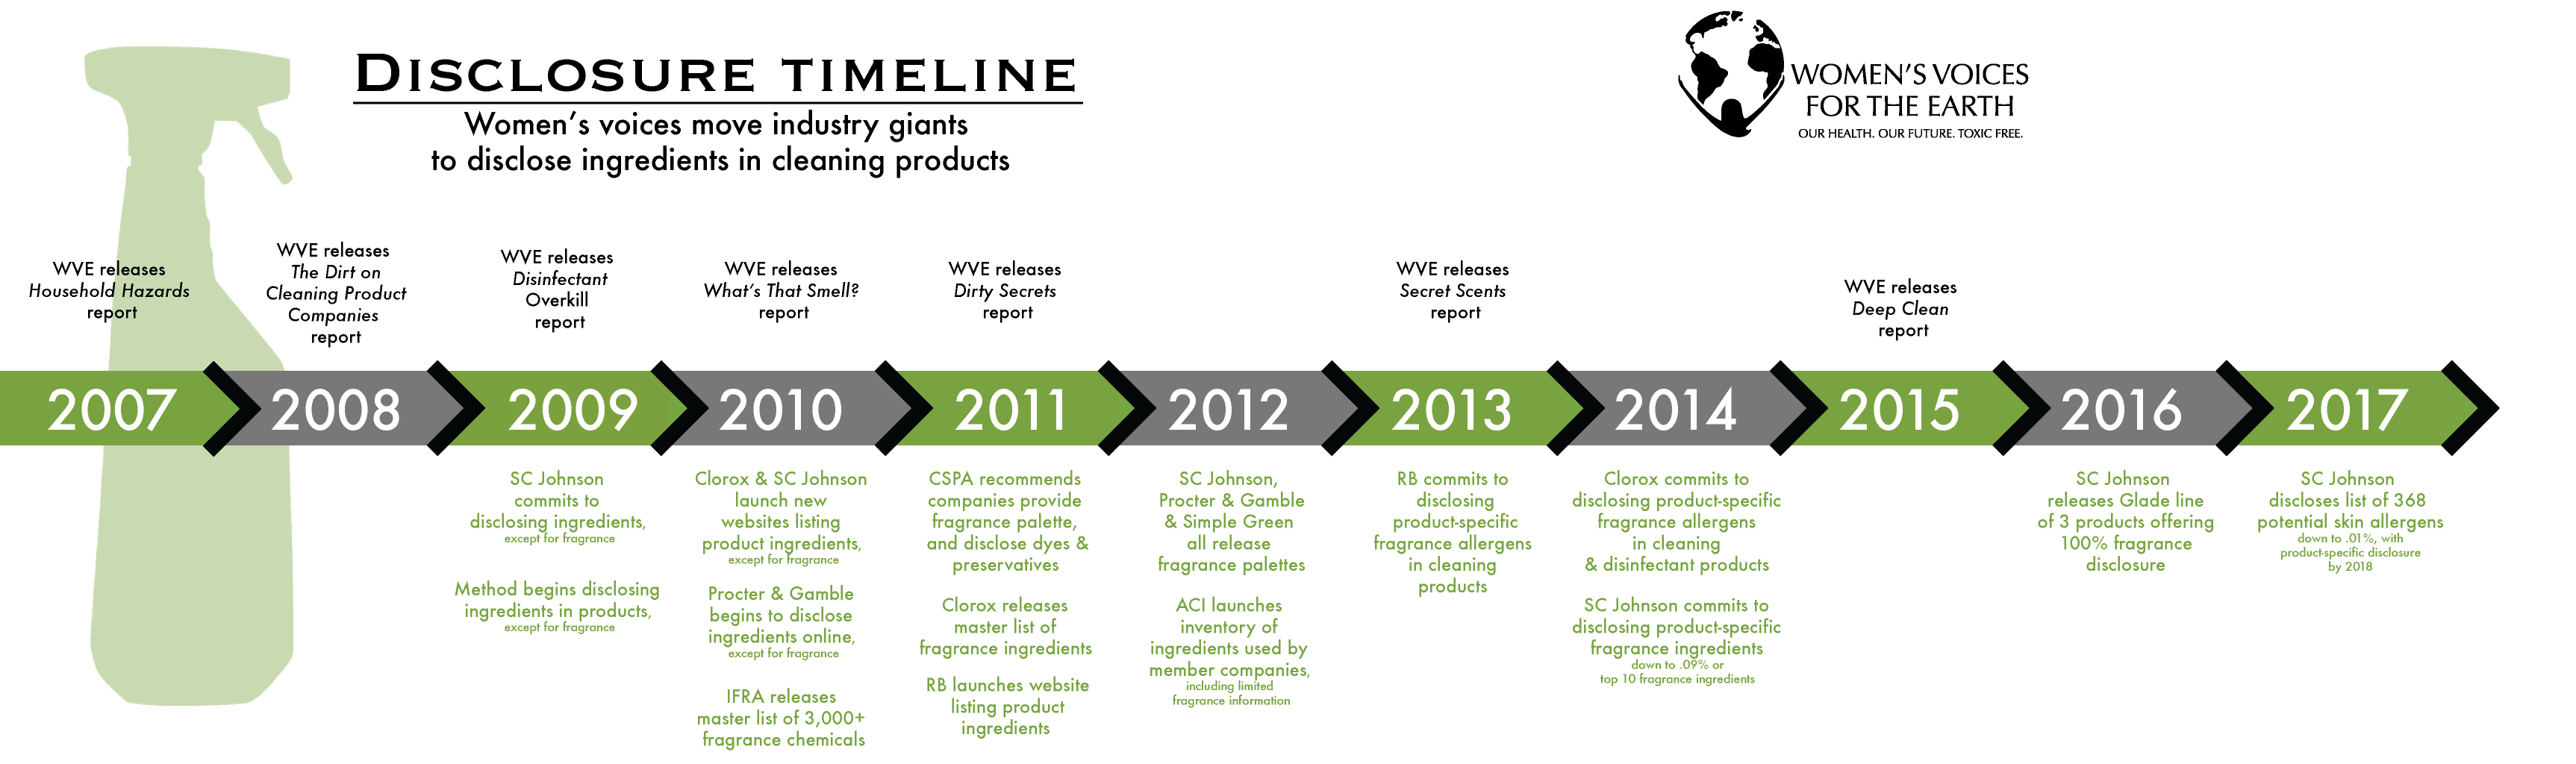 2017 cleaning product ingredient disclosure timeline